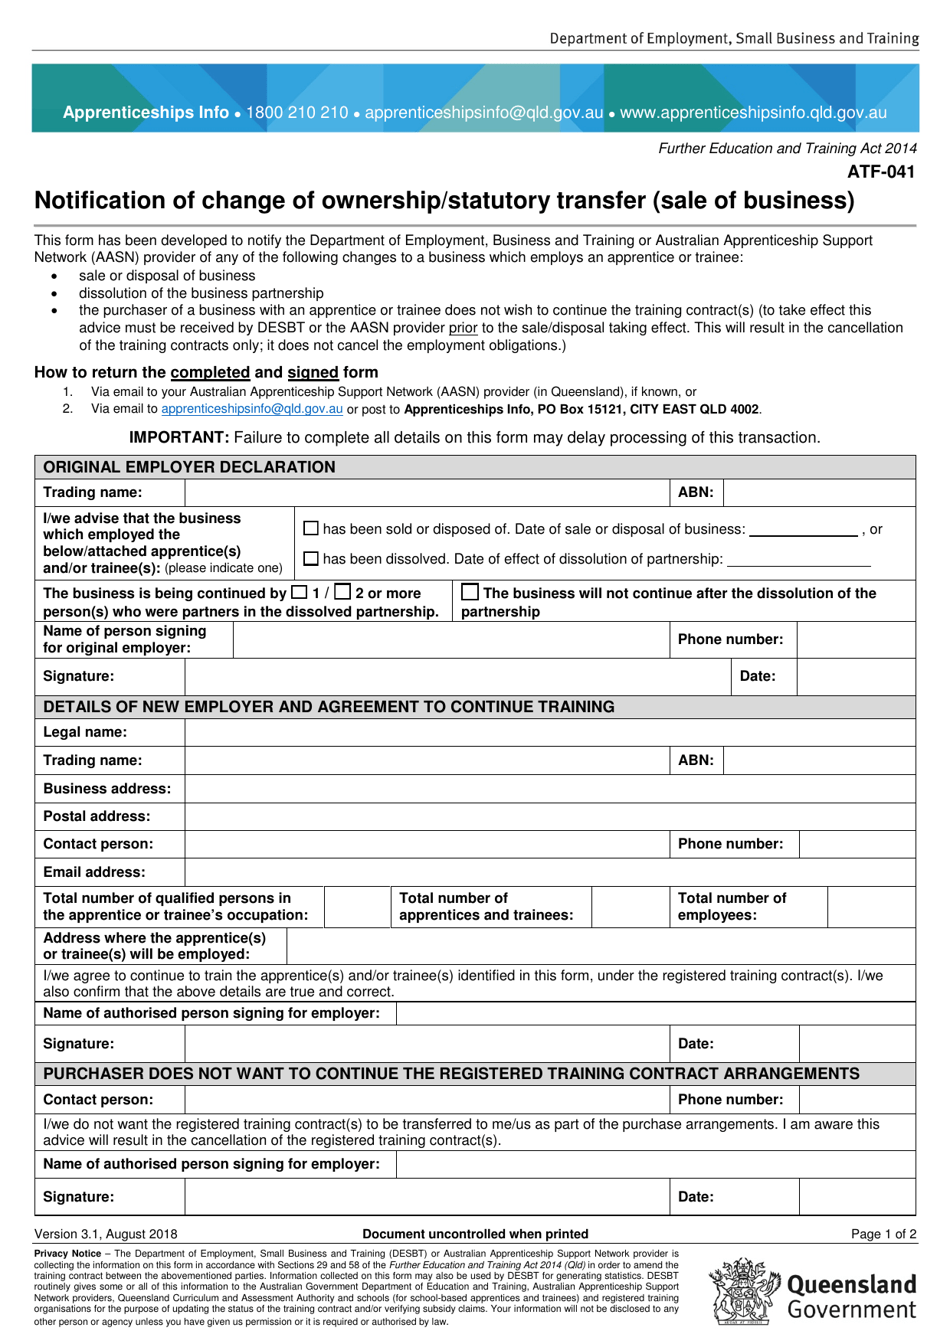 Form ATF-041 Notification of Change of Ownership / Statutory Transfer (Sale of Business) - Queensland, Australia, Page 1